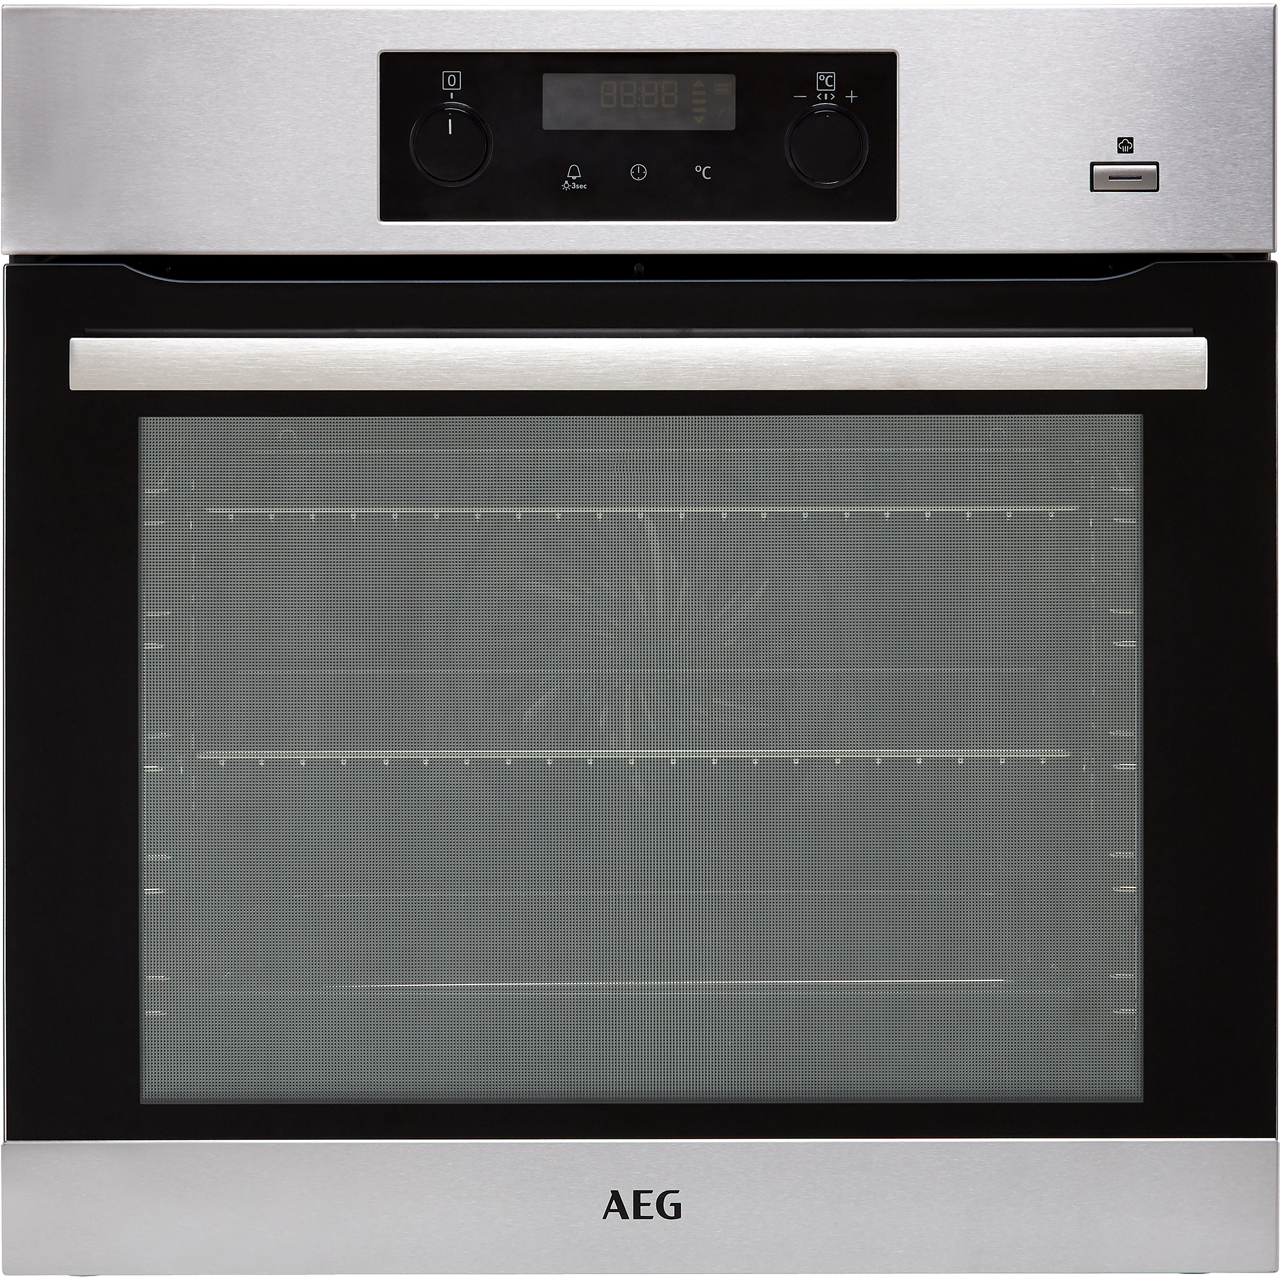 AEG Electric Single Oven - Stainless Steel - A+ Rated